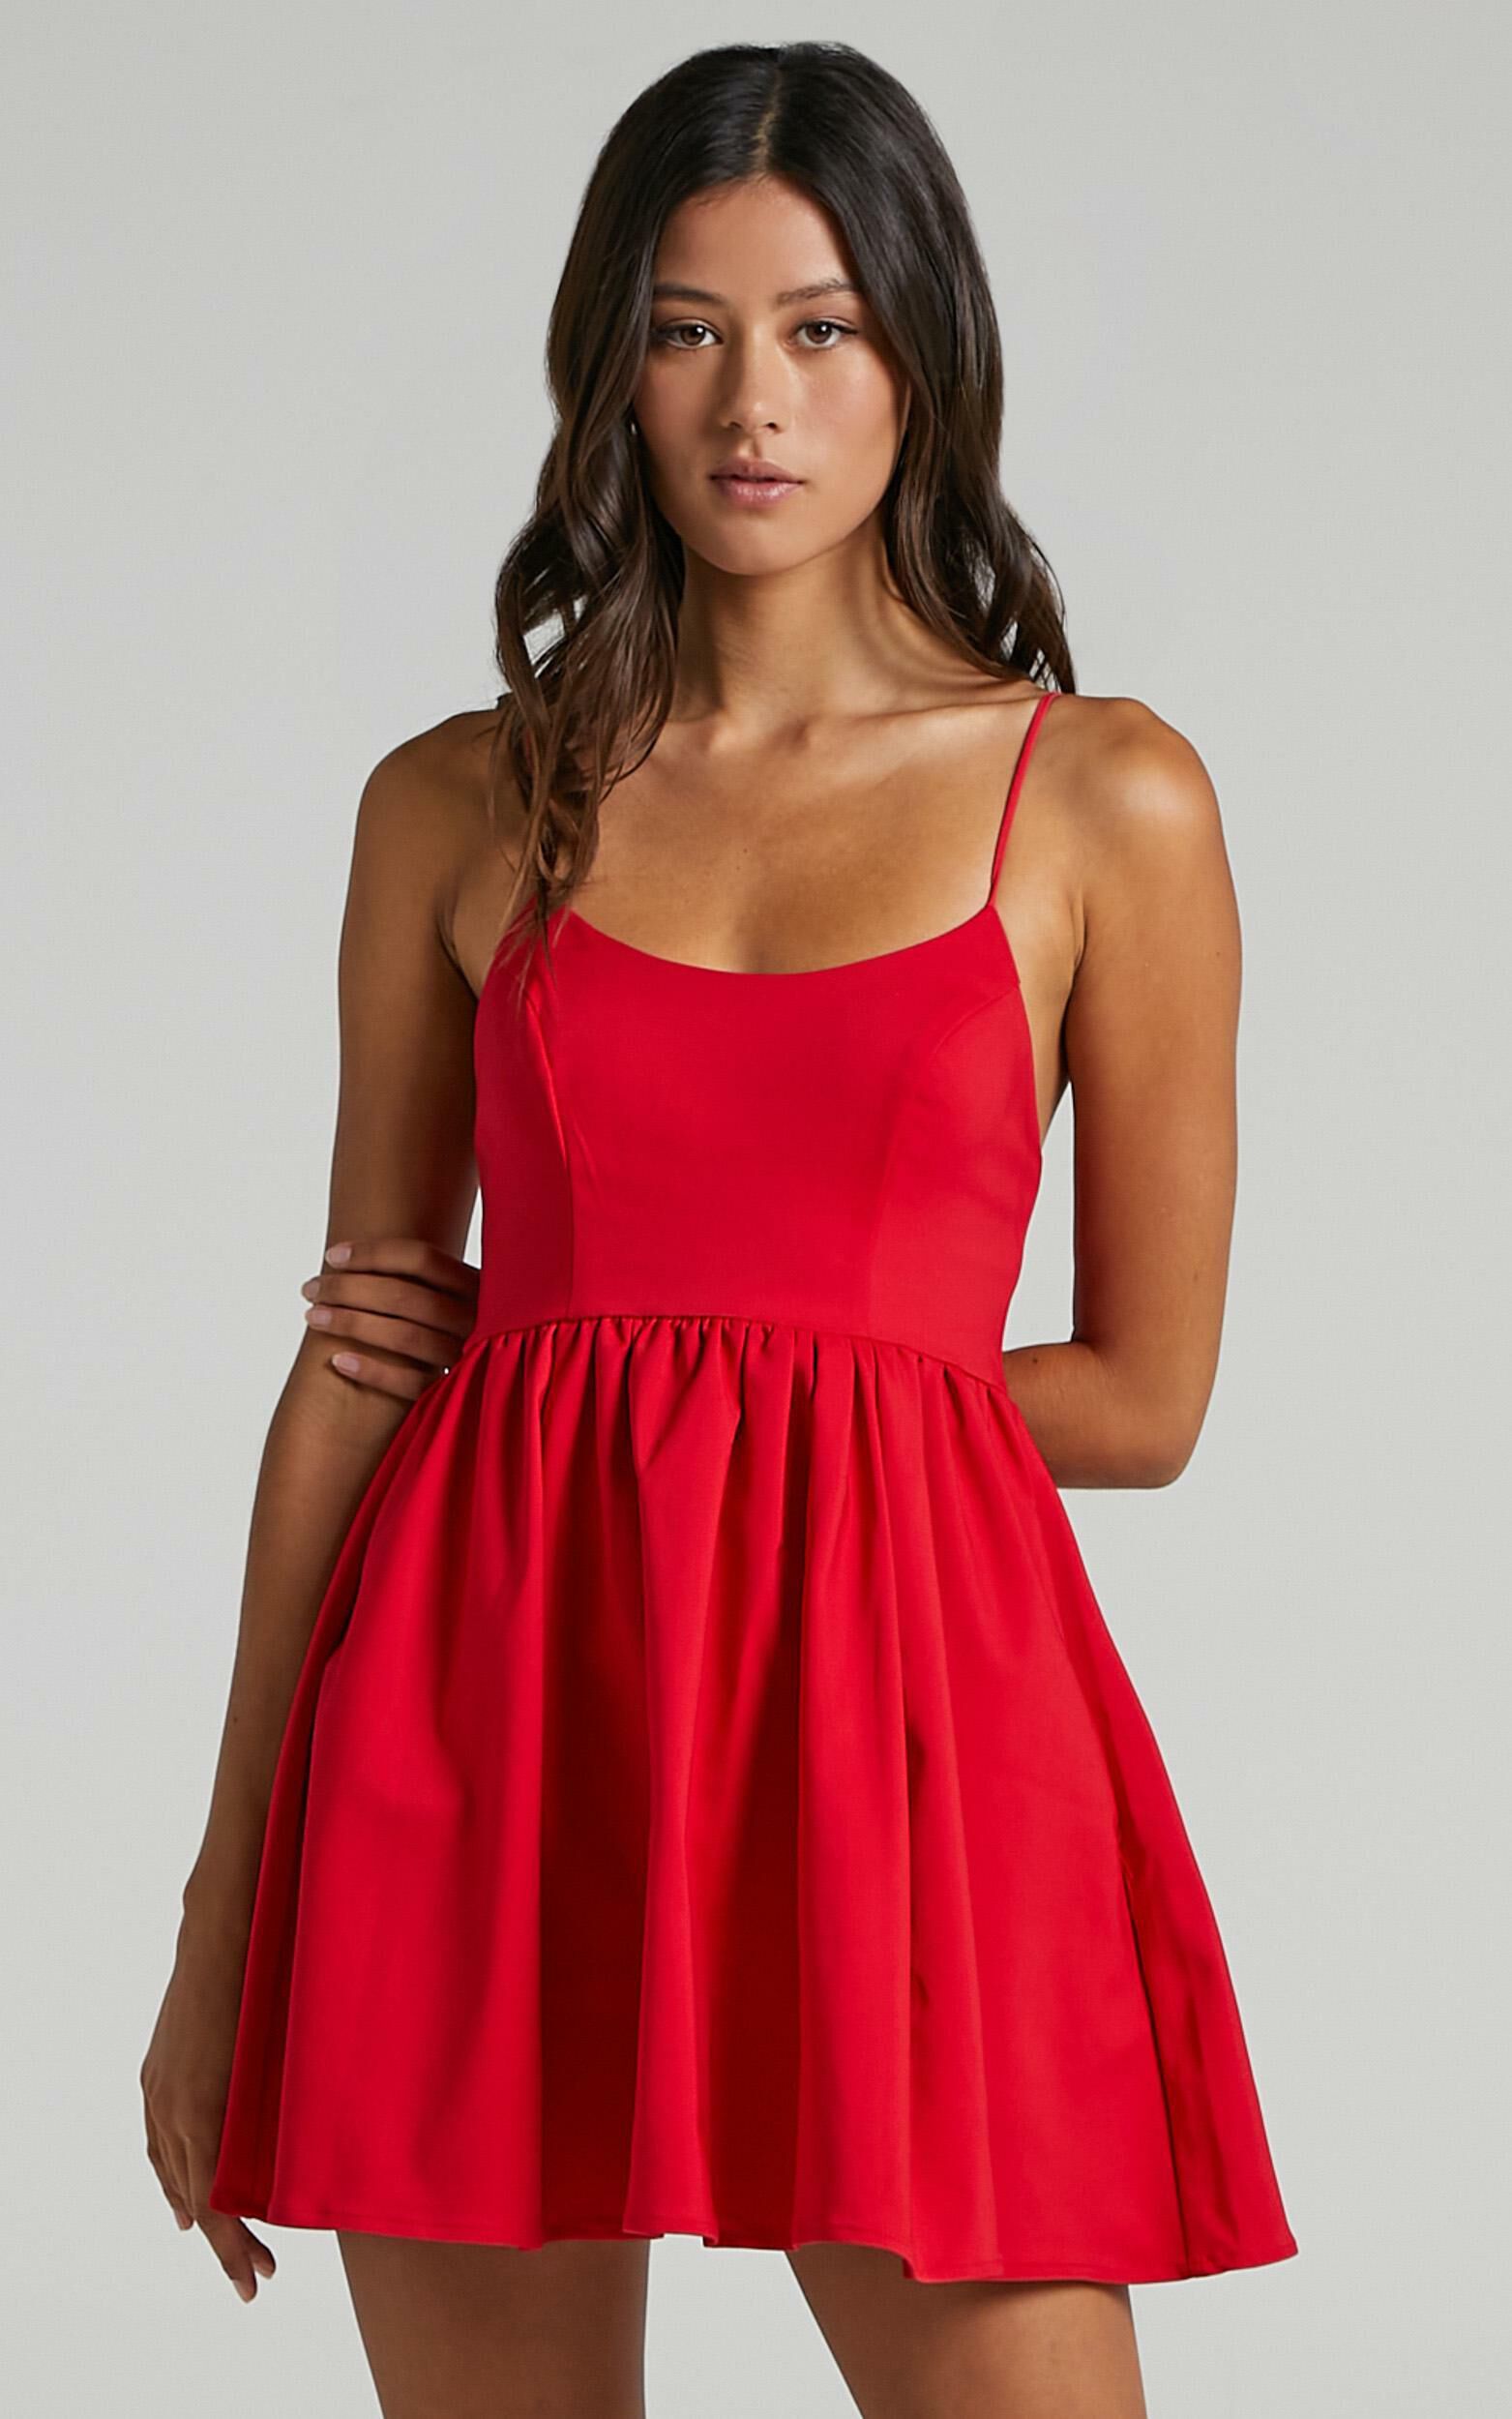 You Got Nothing To Prove Mini Dress - Strappy A-line Dress in Red - 04, RED3